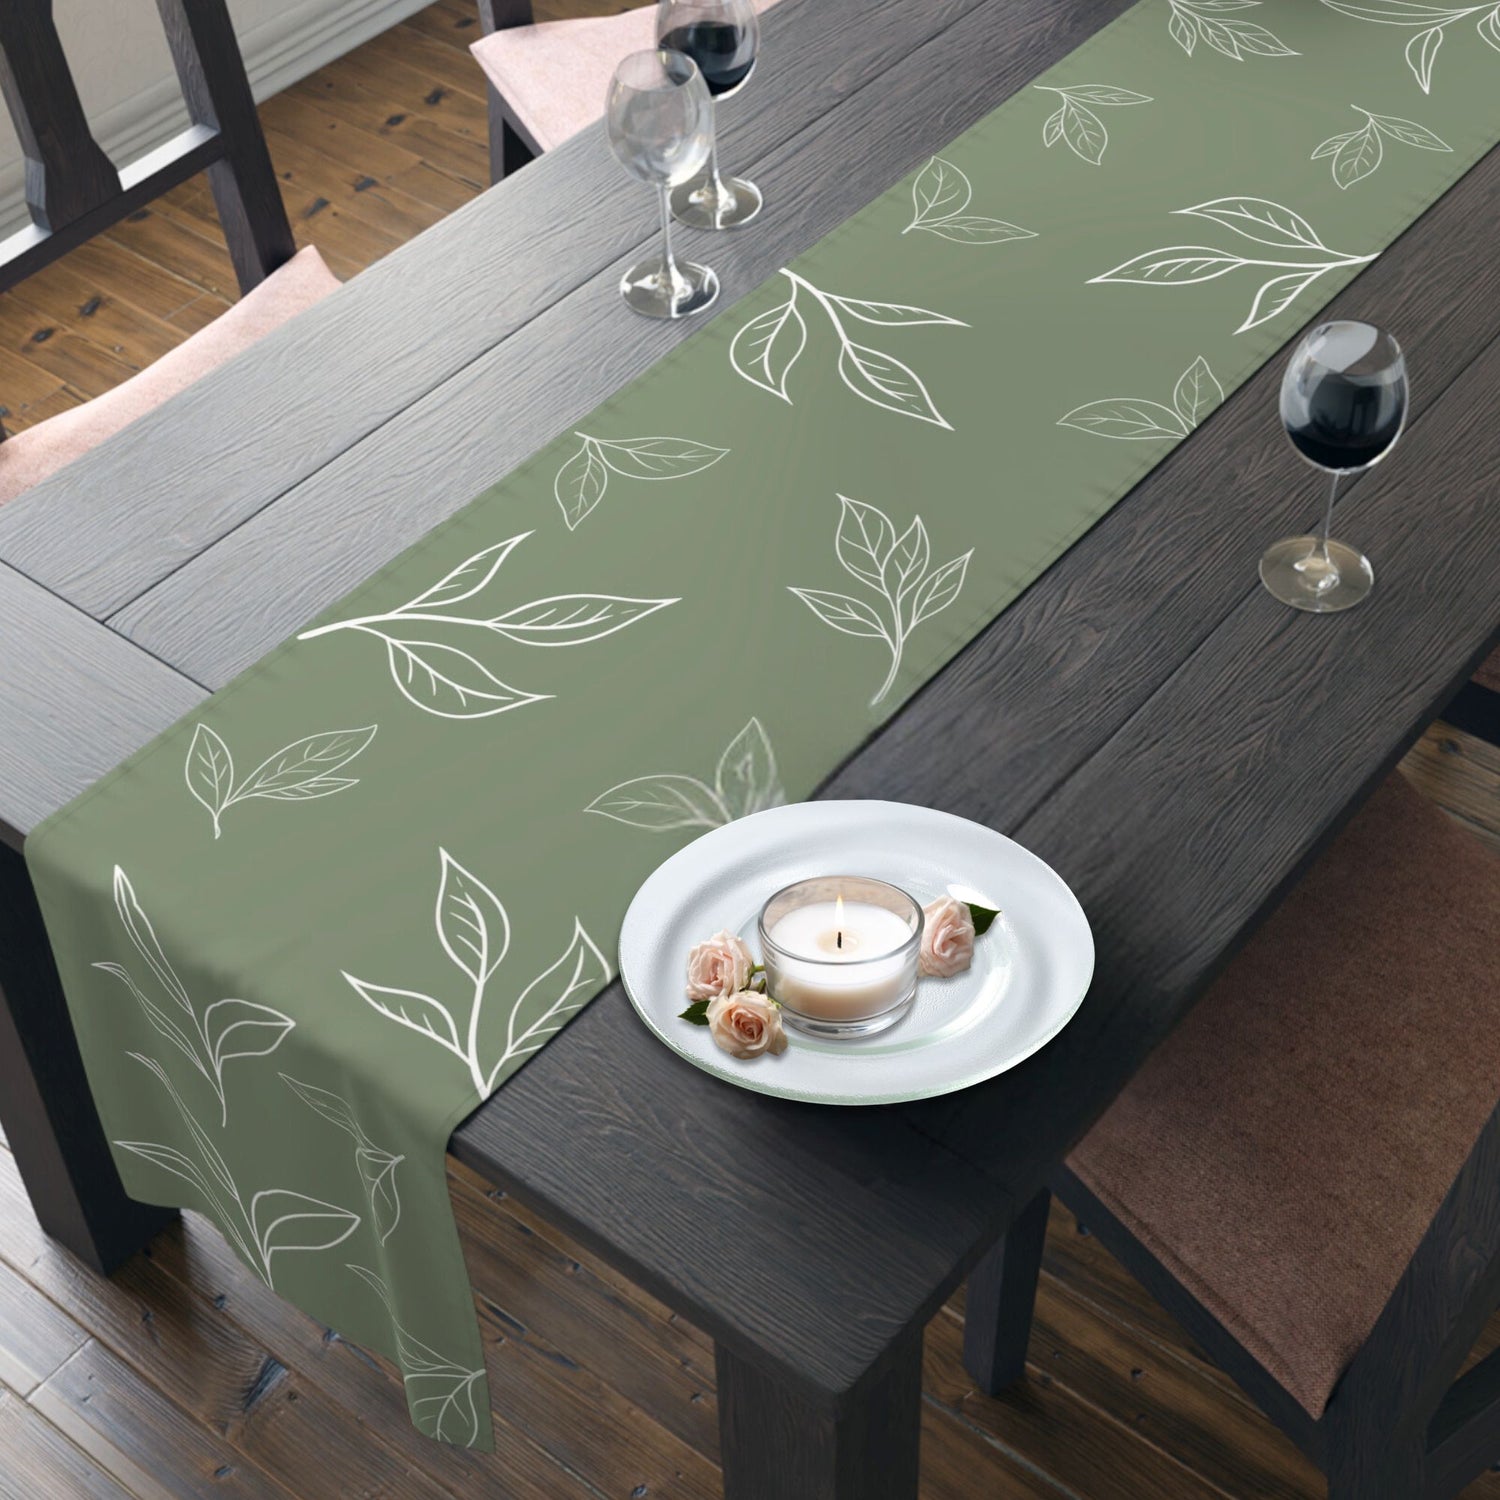  Dining table with a green runner decorated with a white leaf design.